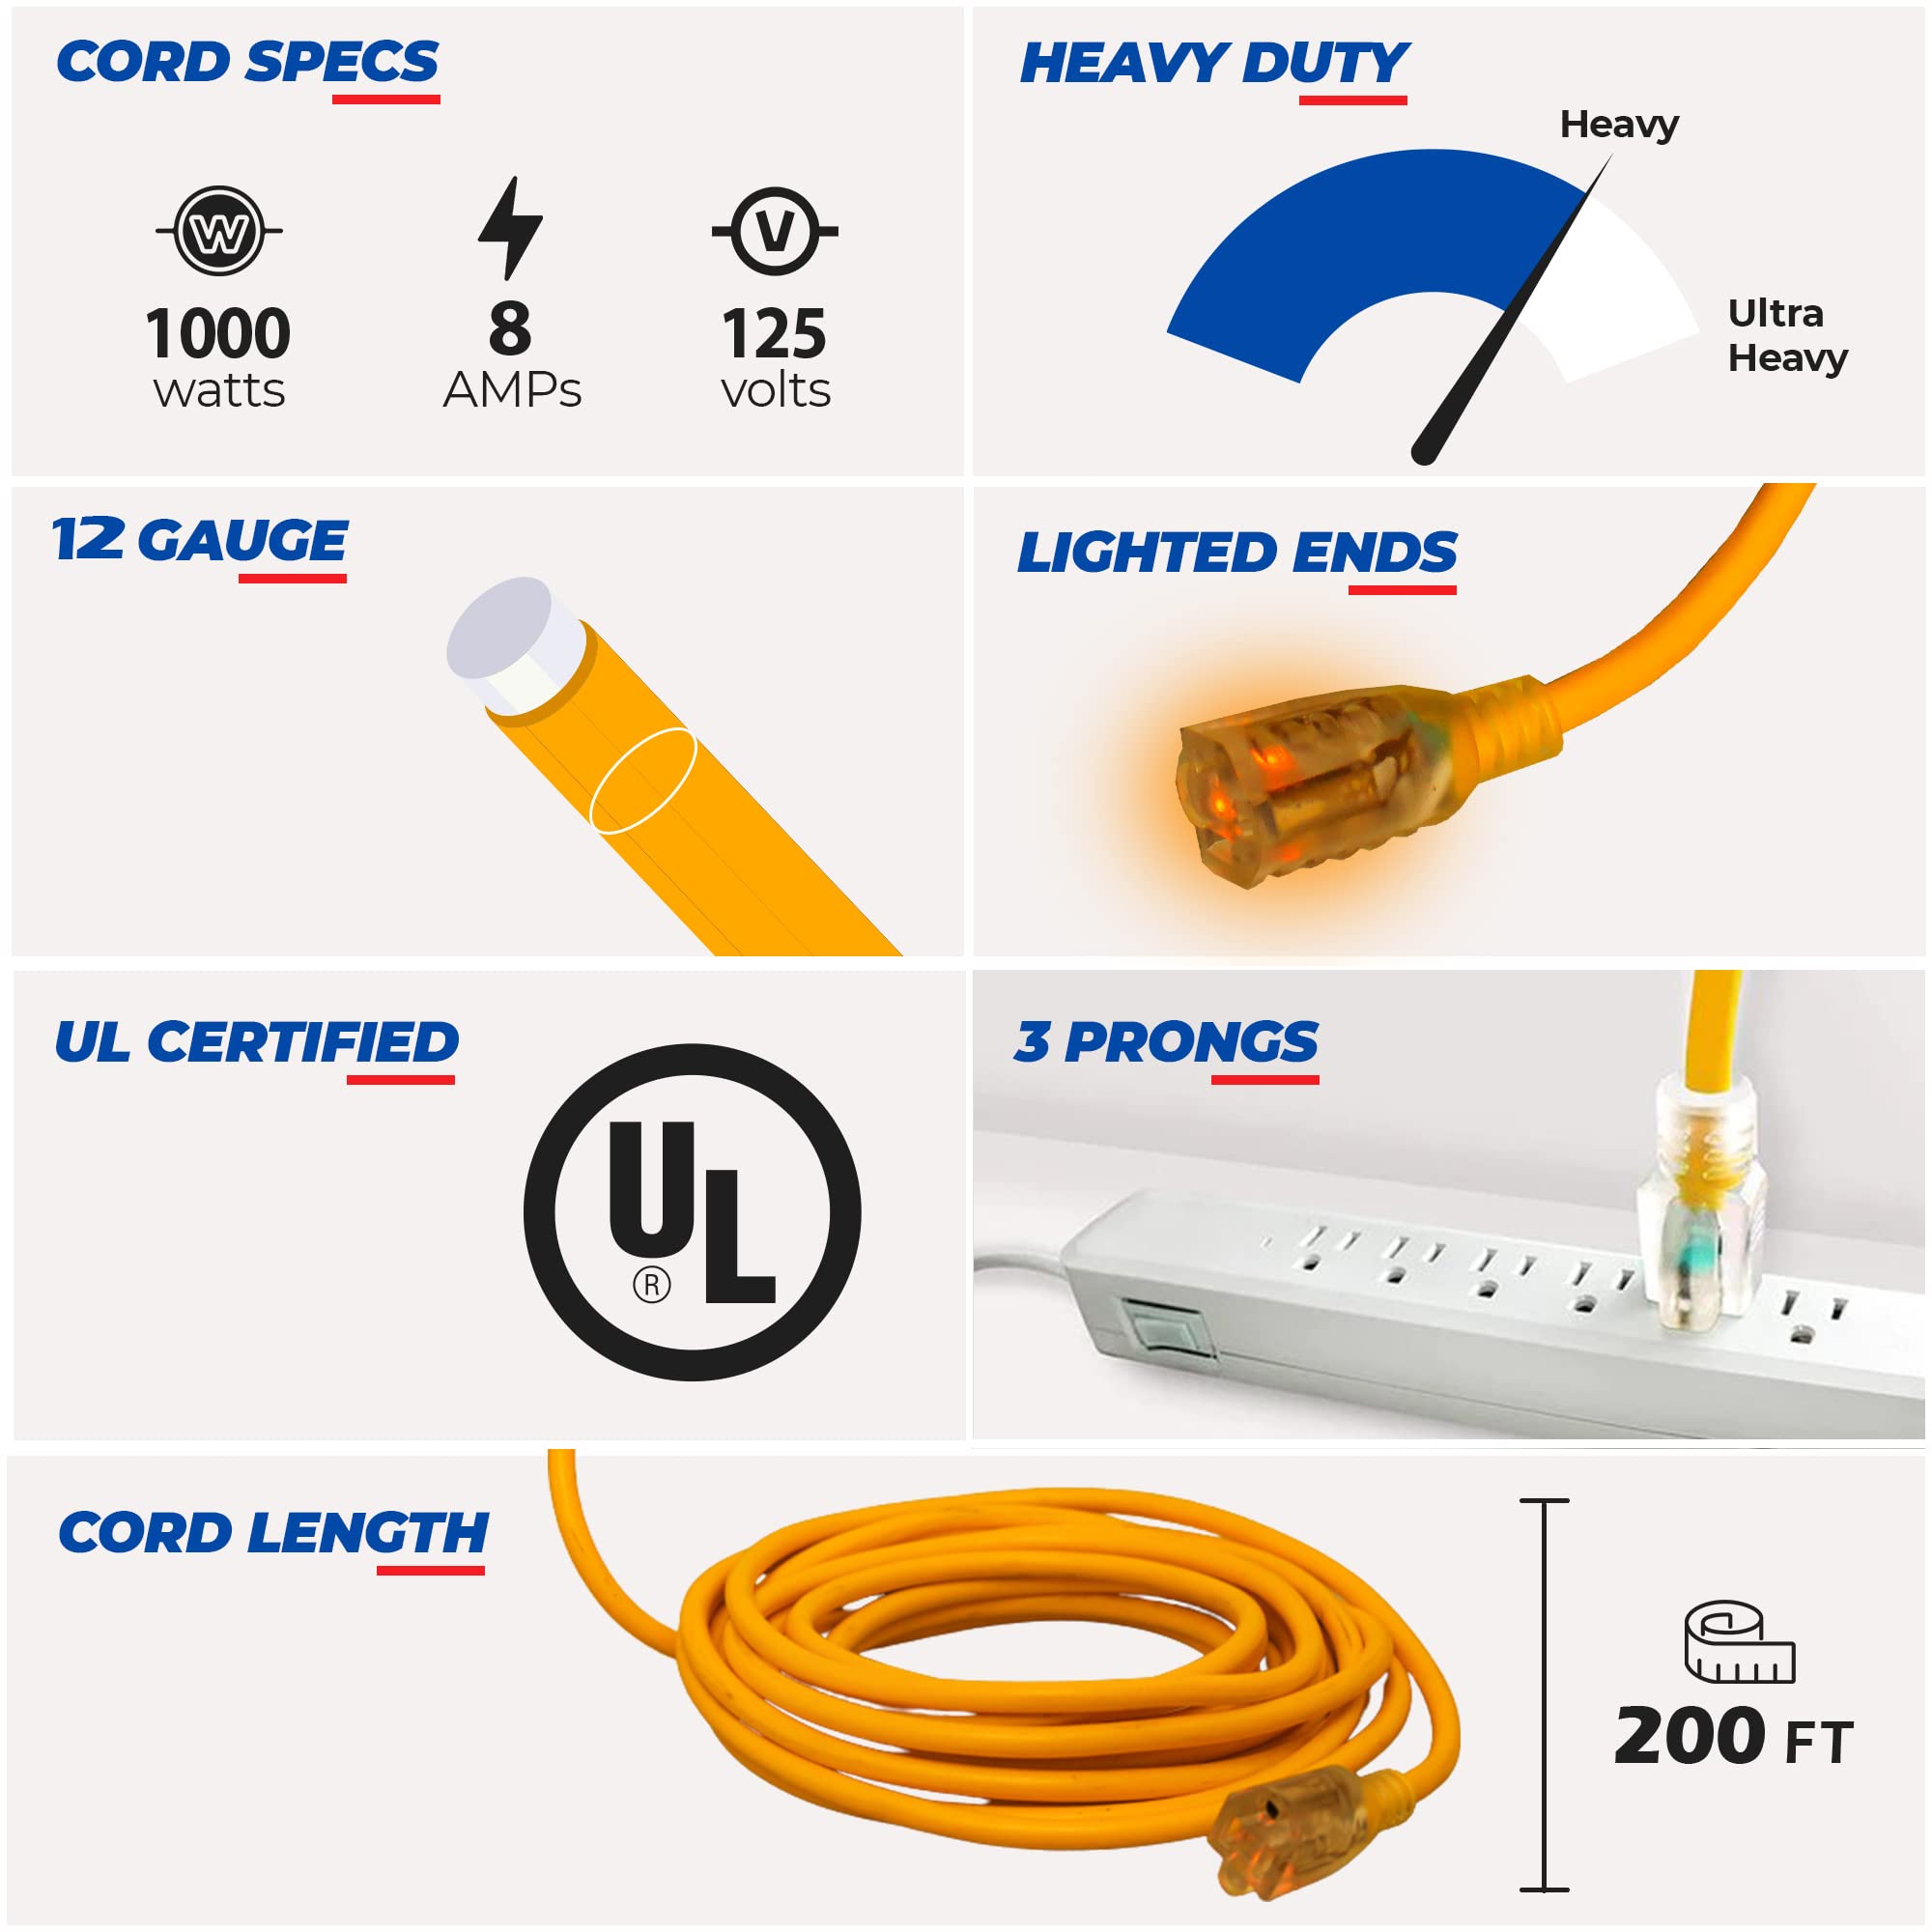 2-pack) 200 ft Power Extension Cord Outdoor  Indoor Heavy Duty 12 gauge/3  prong SJTW (Yellow) Lighted end Extra Durability AMP 125 Volts 1000 Watts  by LifeSupplyUSA